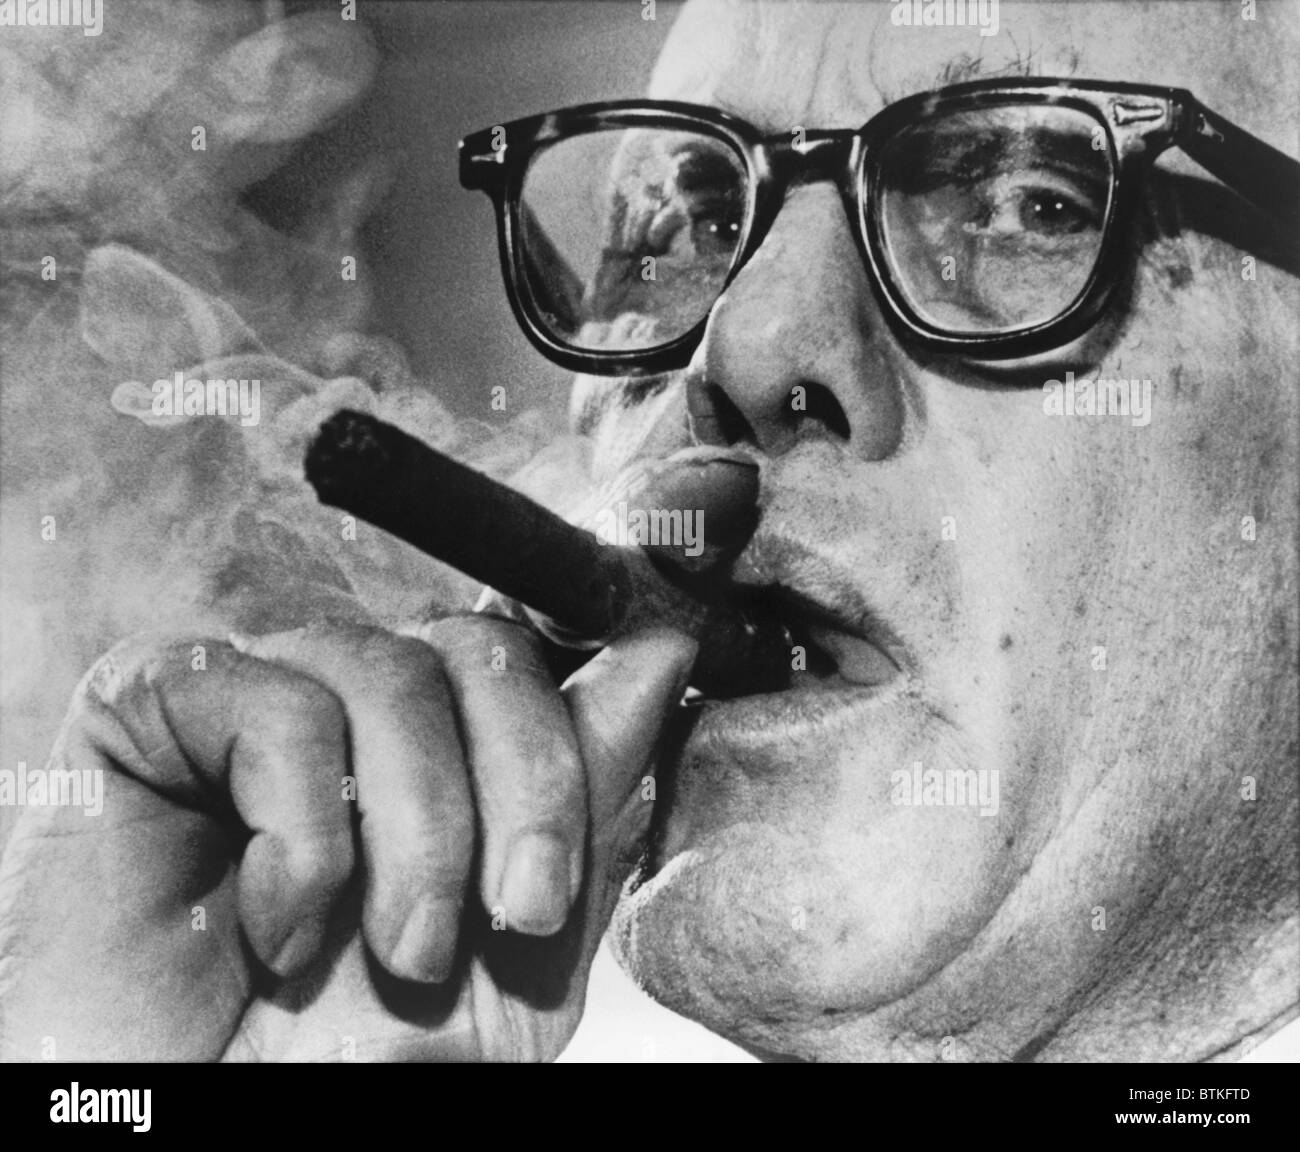 George Meany (1894-1980), president of the AFL-CIO from 1955 to 1979. He was a pragmatic Cold War era labor leader, moving the unions away from leftist politics. 1966. Stock Photo